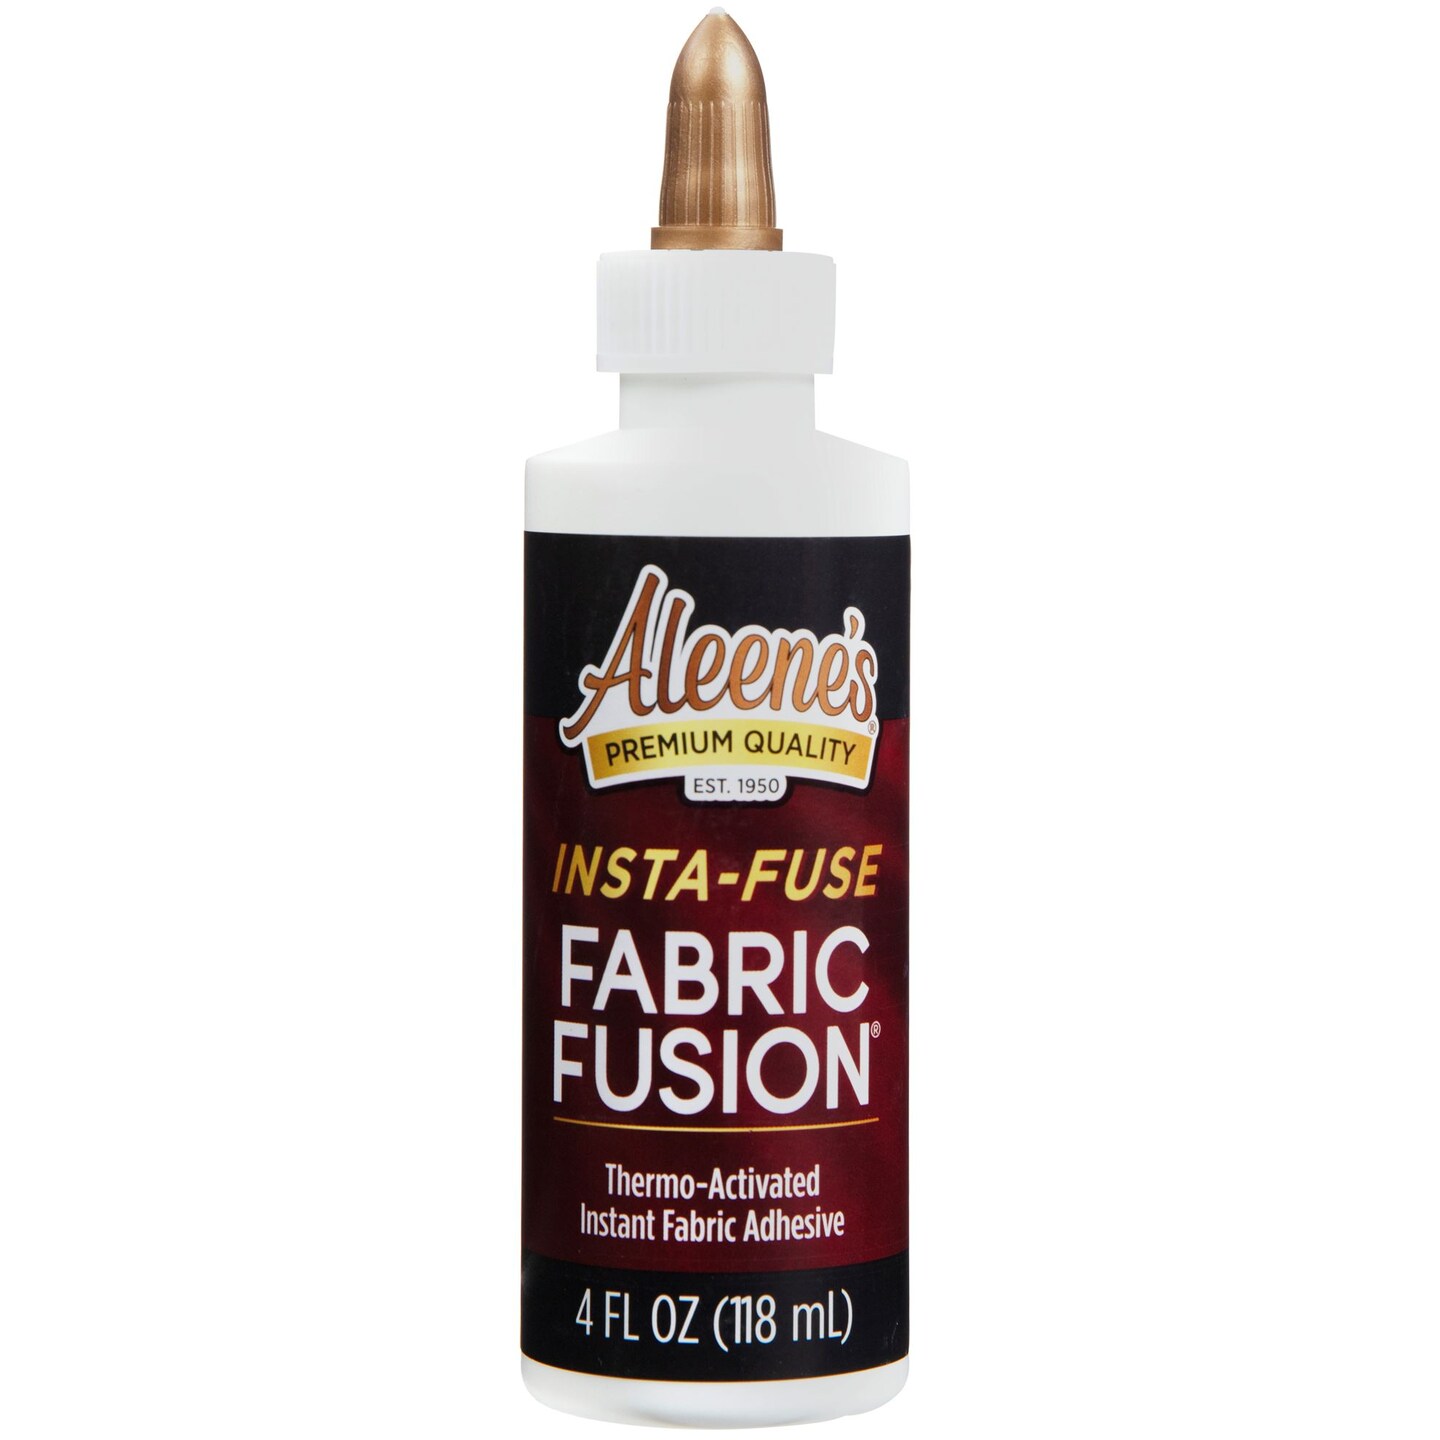 Aleene''s Insta-Fuse Fabric Fusion Thermo-Activated Instant Fabric